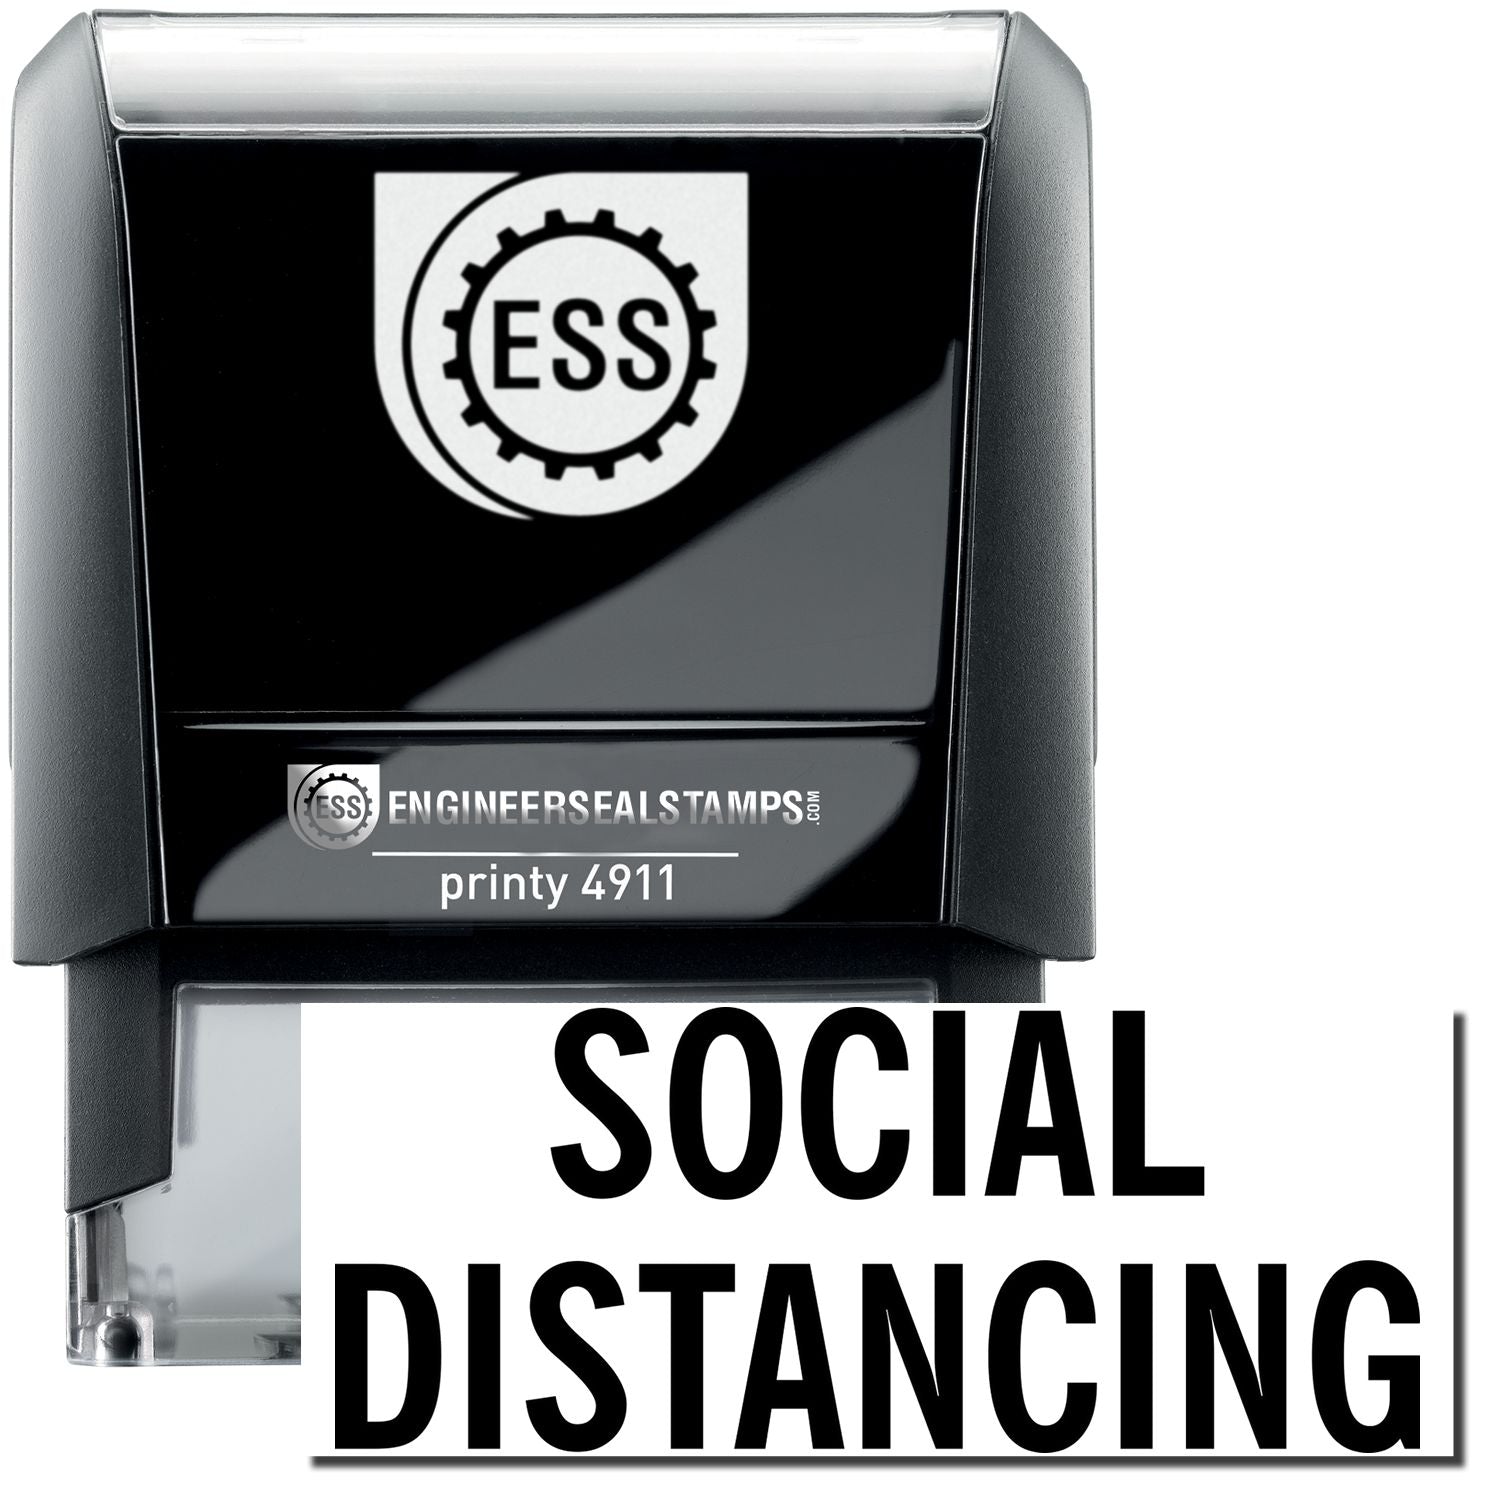 A self-inking stamp with a stamped image showing how the text "SOCIAL DISTANCING" is displayed after stamping.